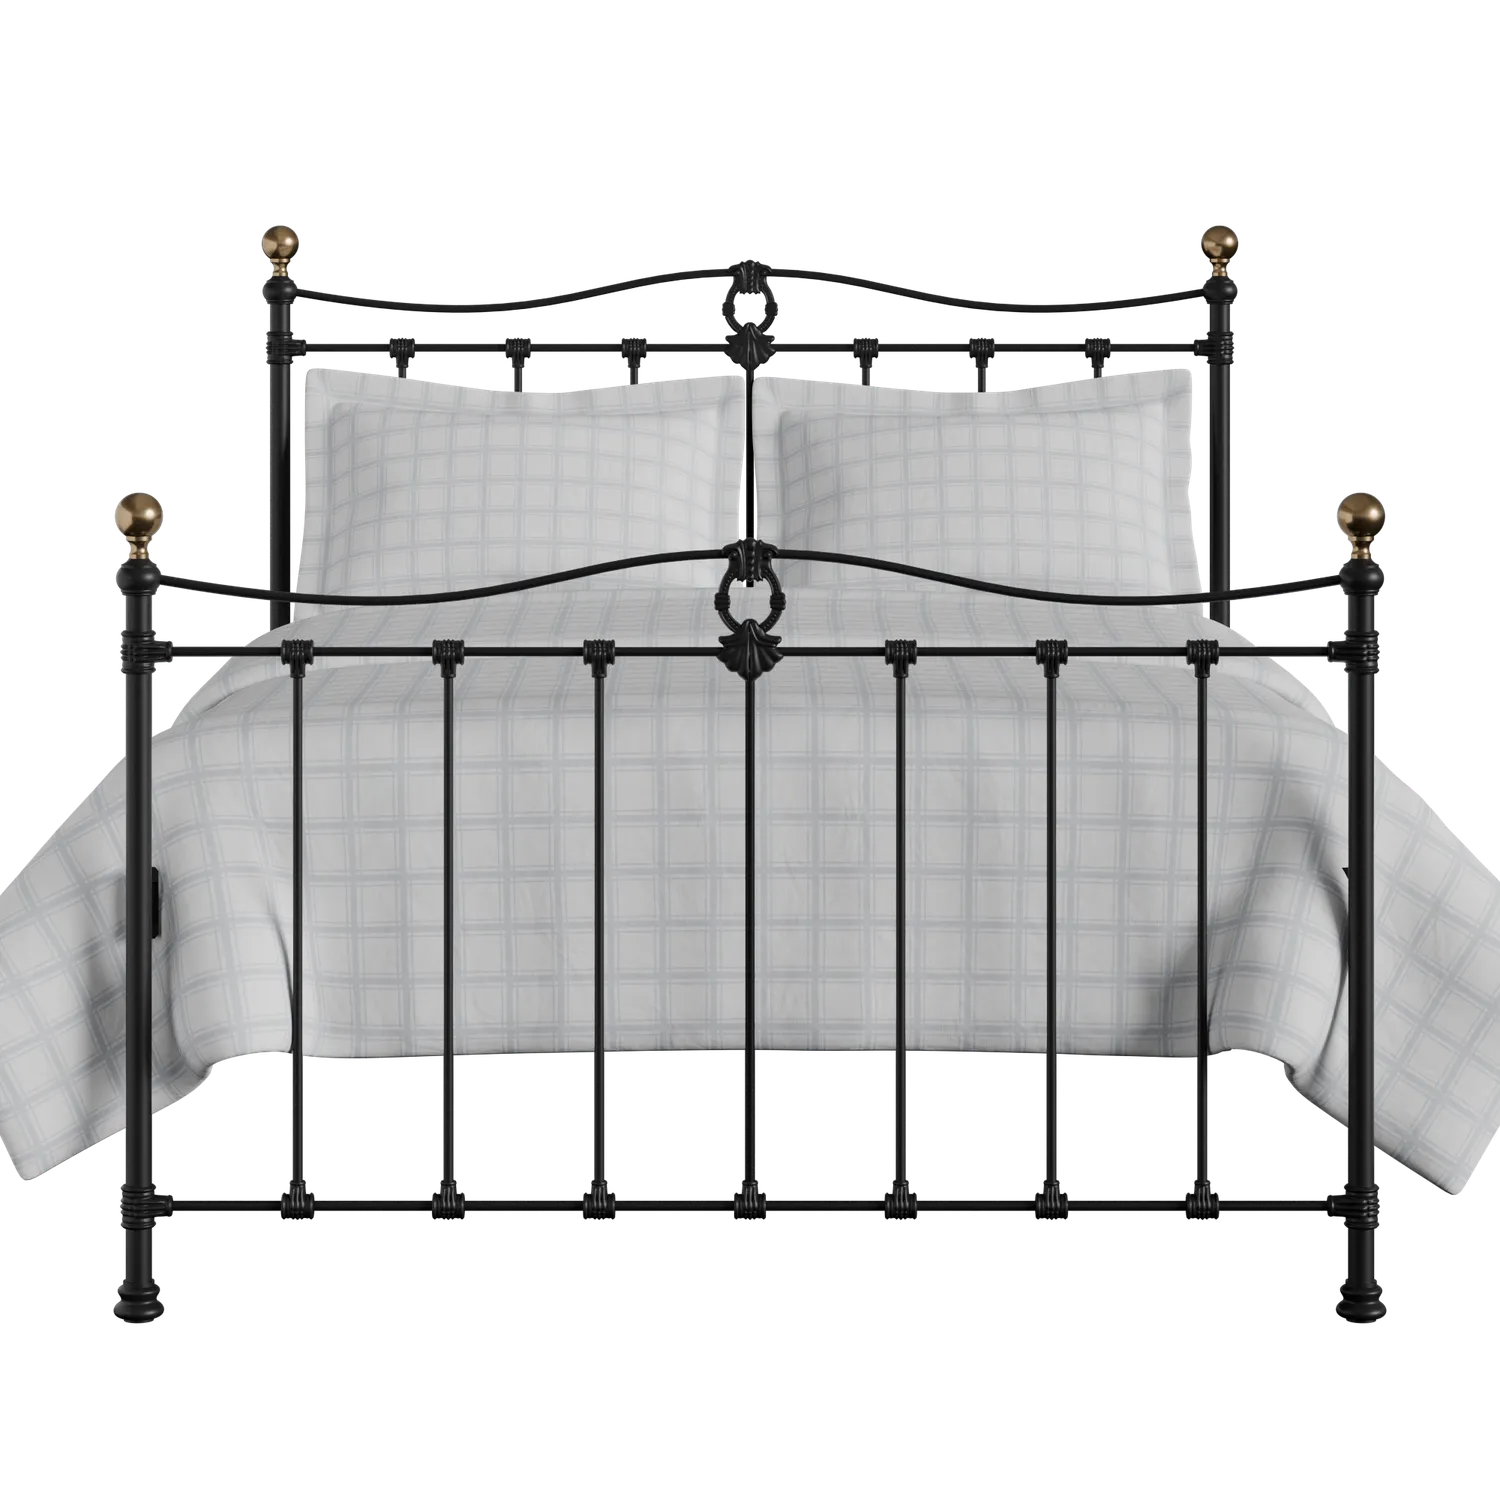 Tulsk iron/metal bed in black